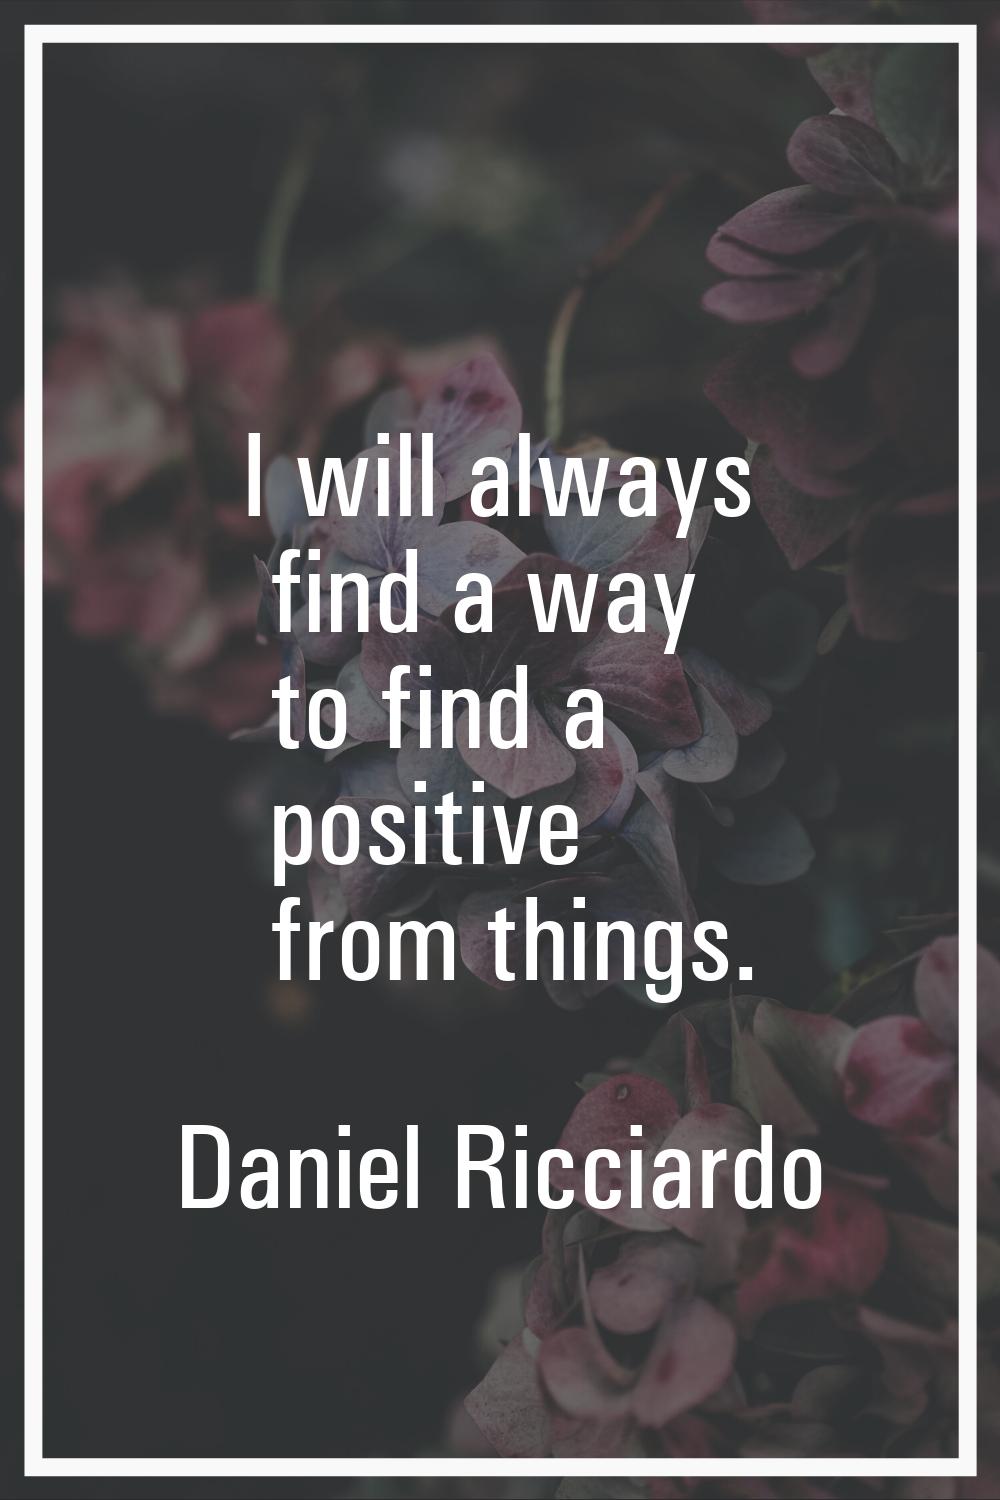 I will always find a way to find a positive from things.